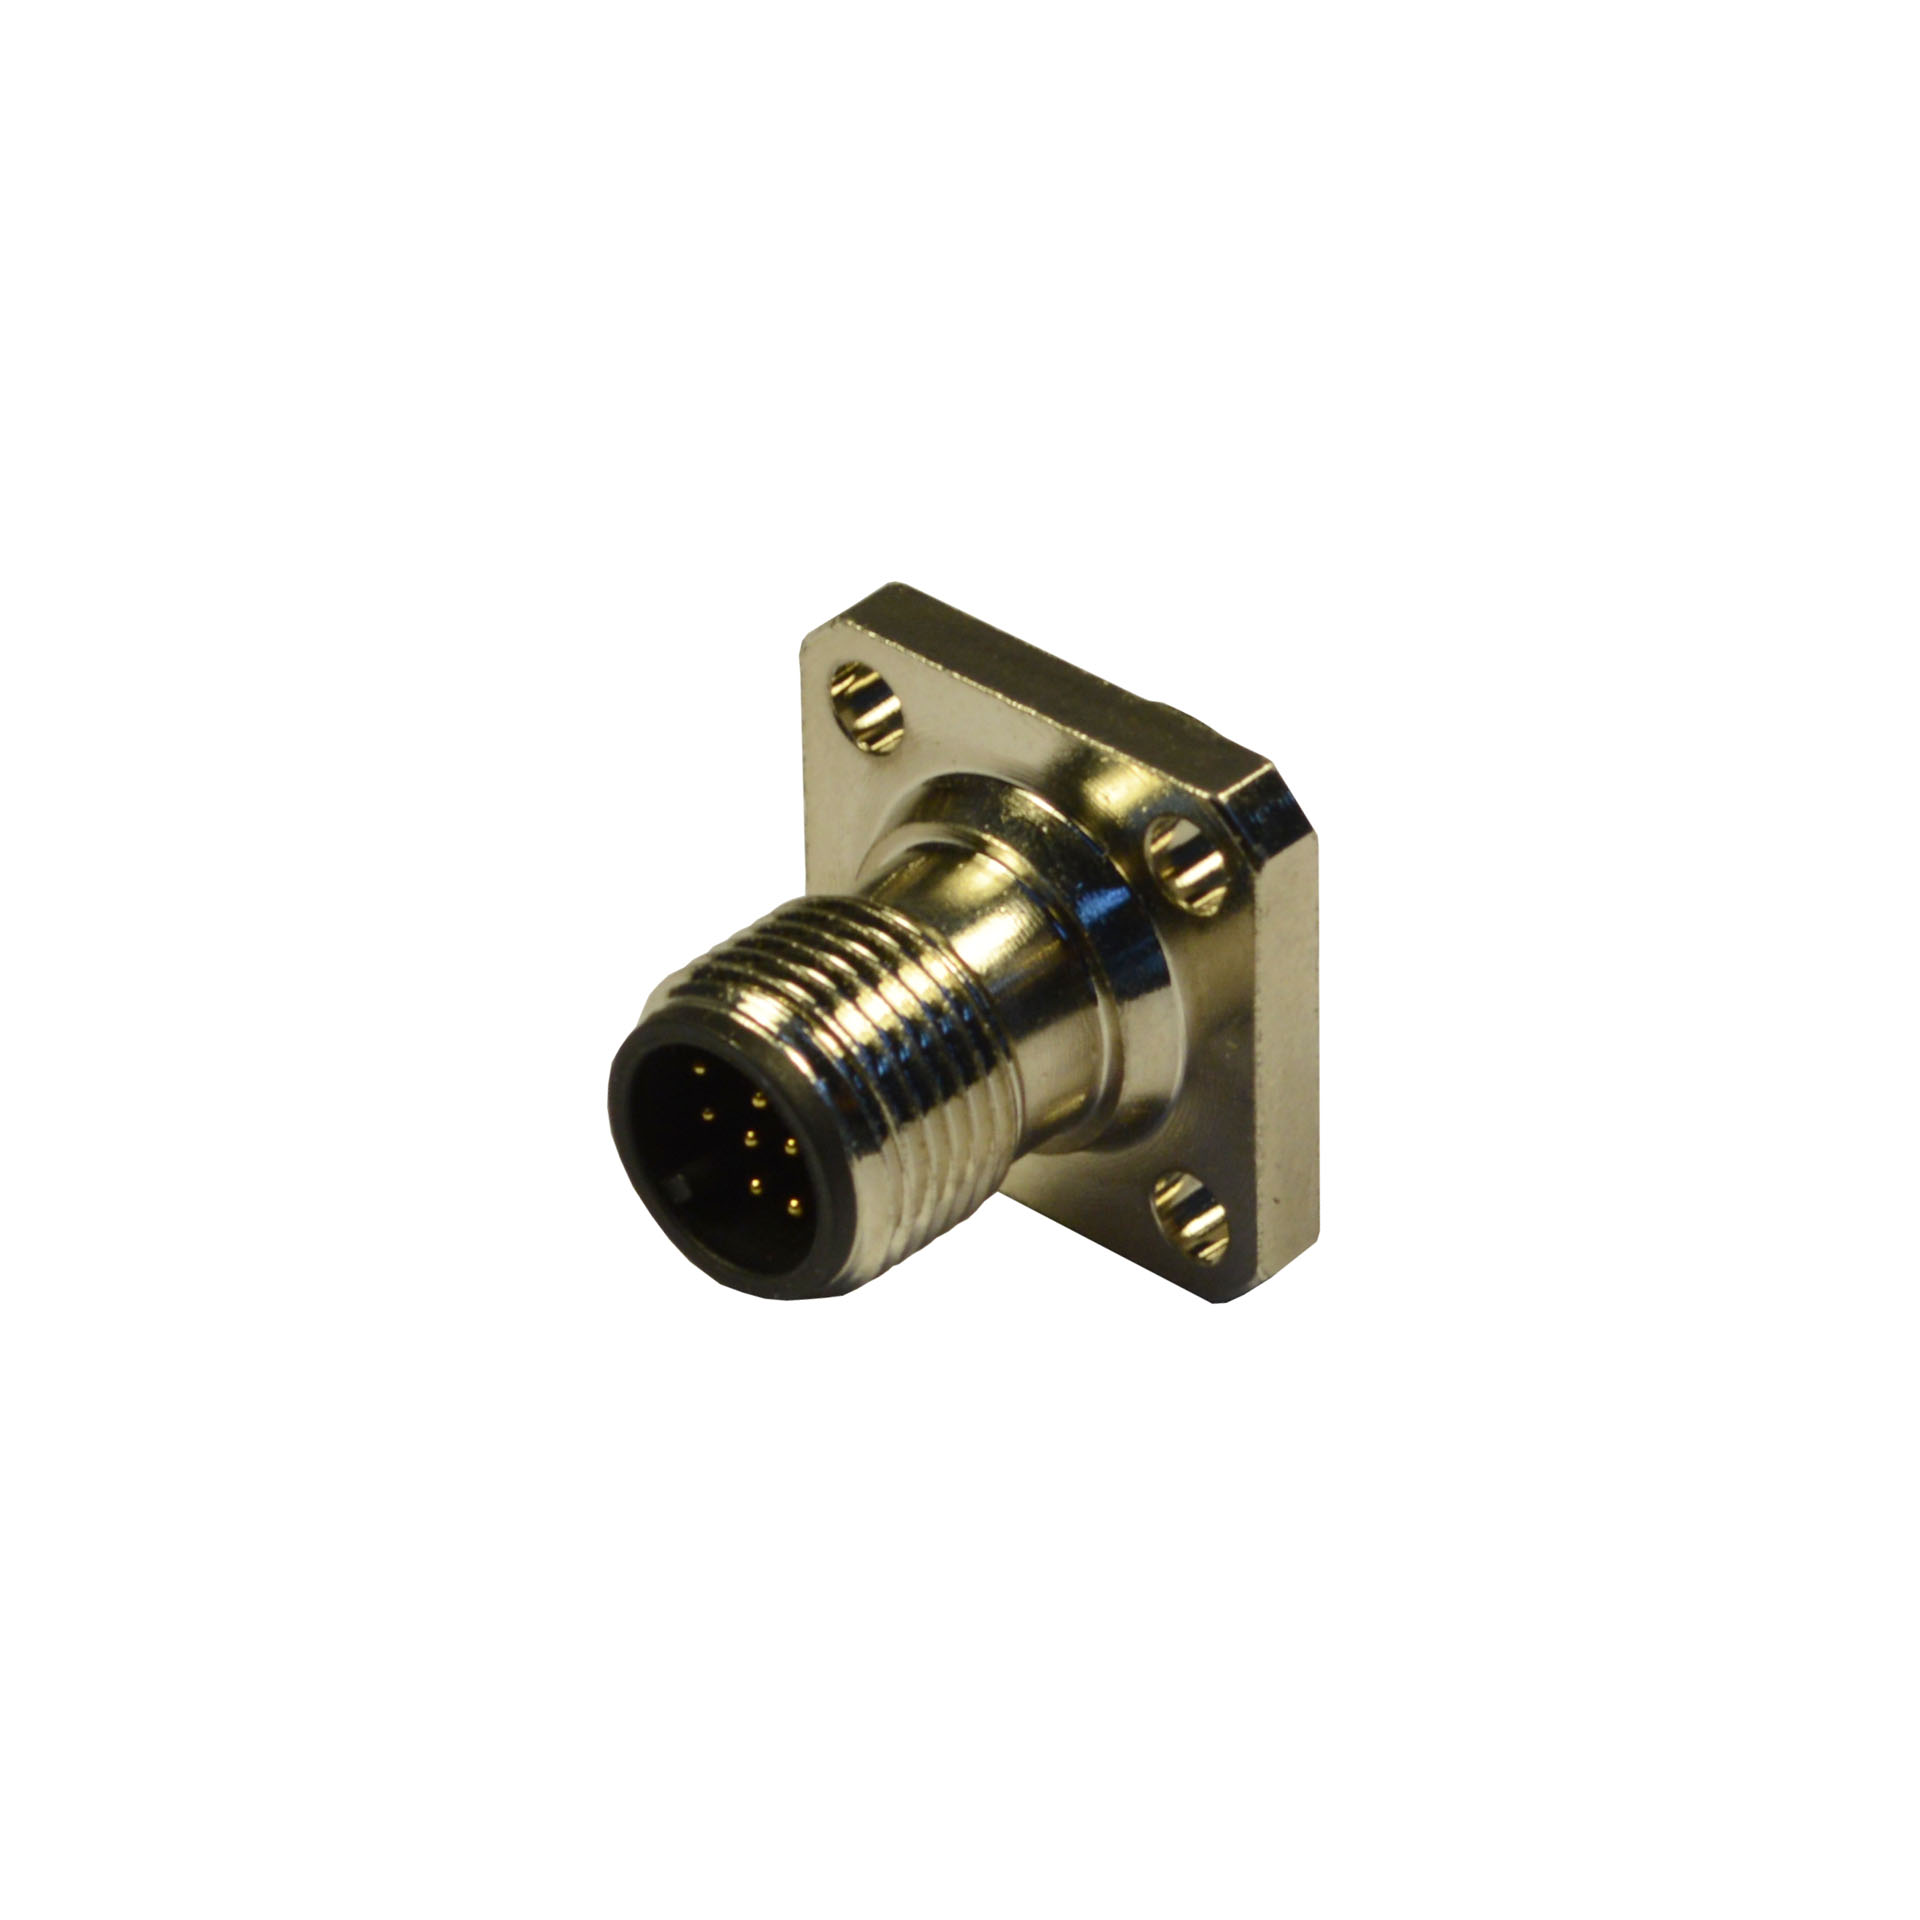 M12 to panel,male,frontal mounting with square flange 20x20mm,12p.,solder contacts